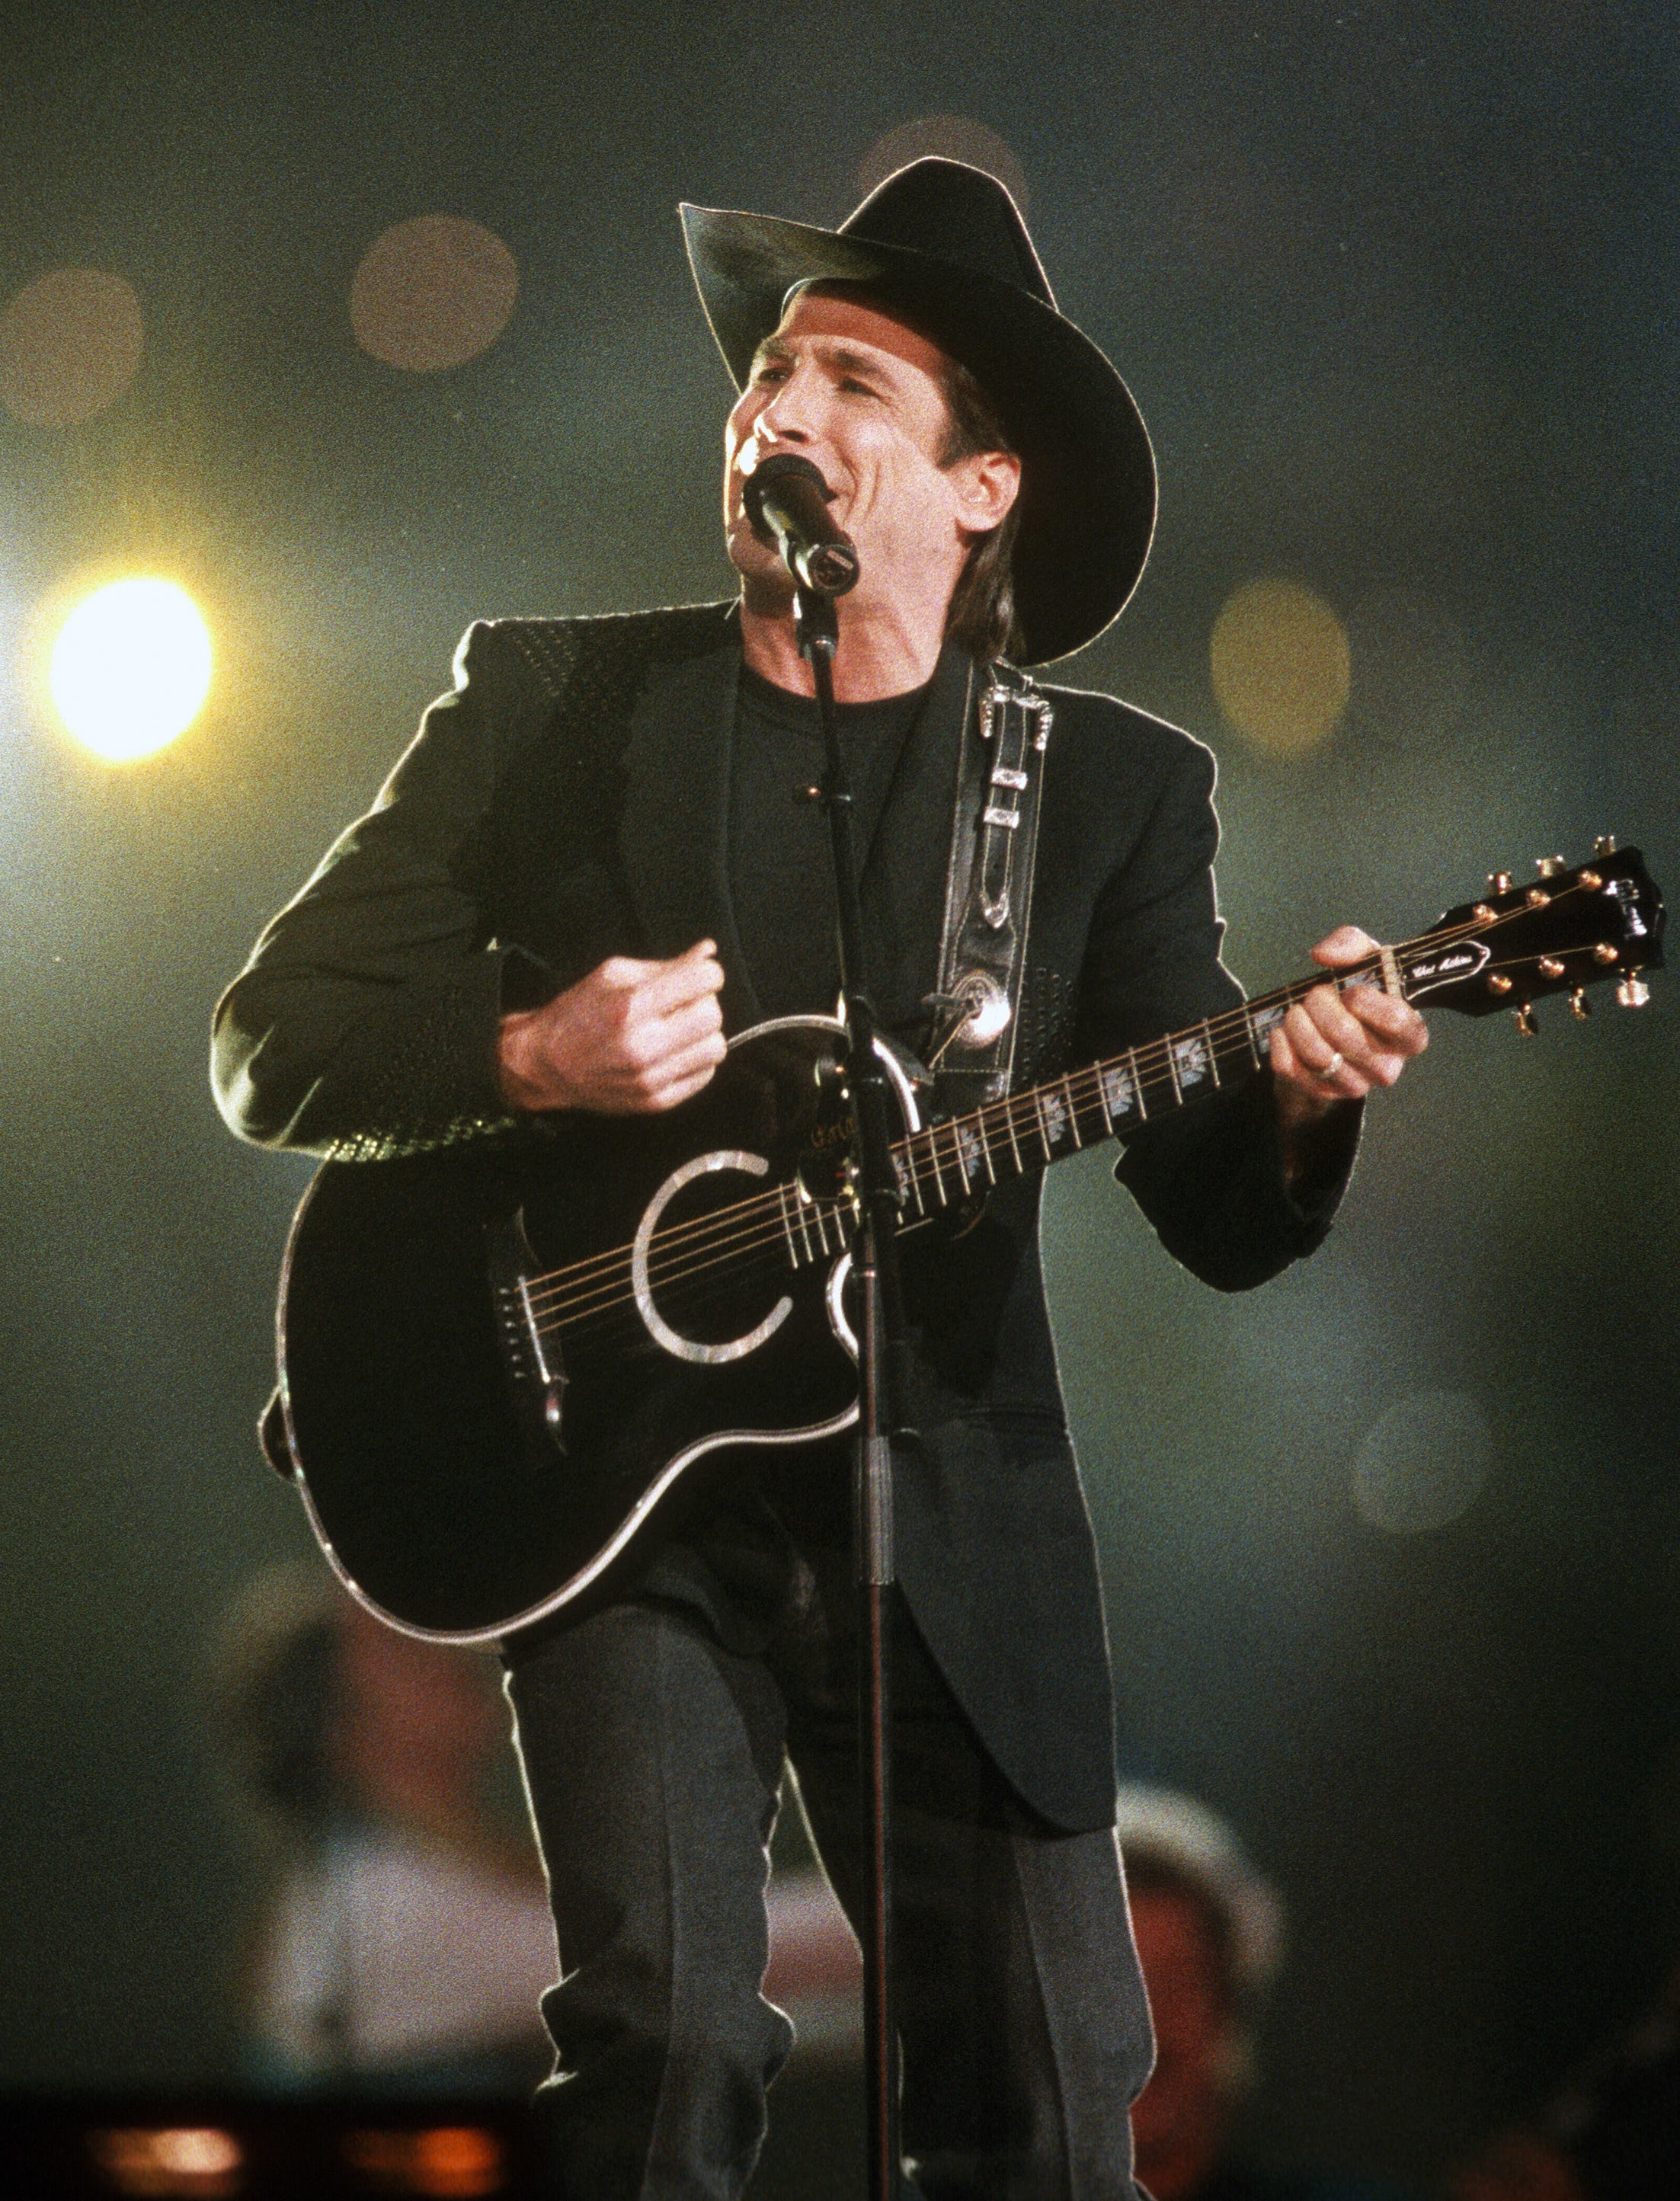 Clint Black preforms during the halftime show of Super Bowl XXVIII